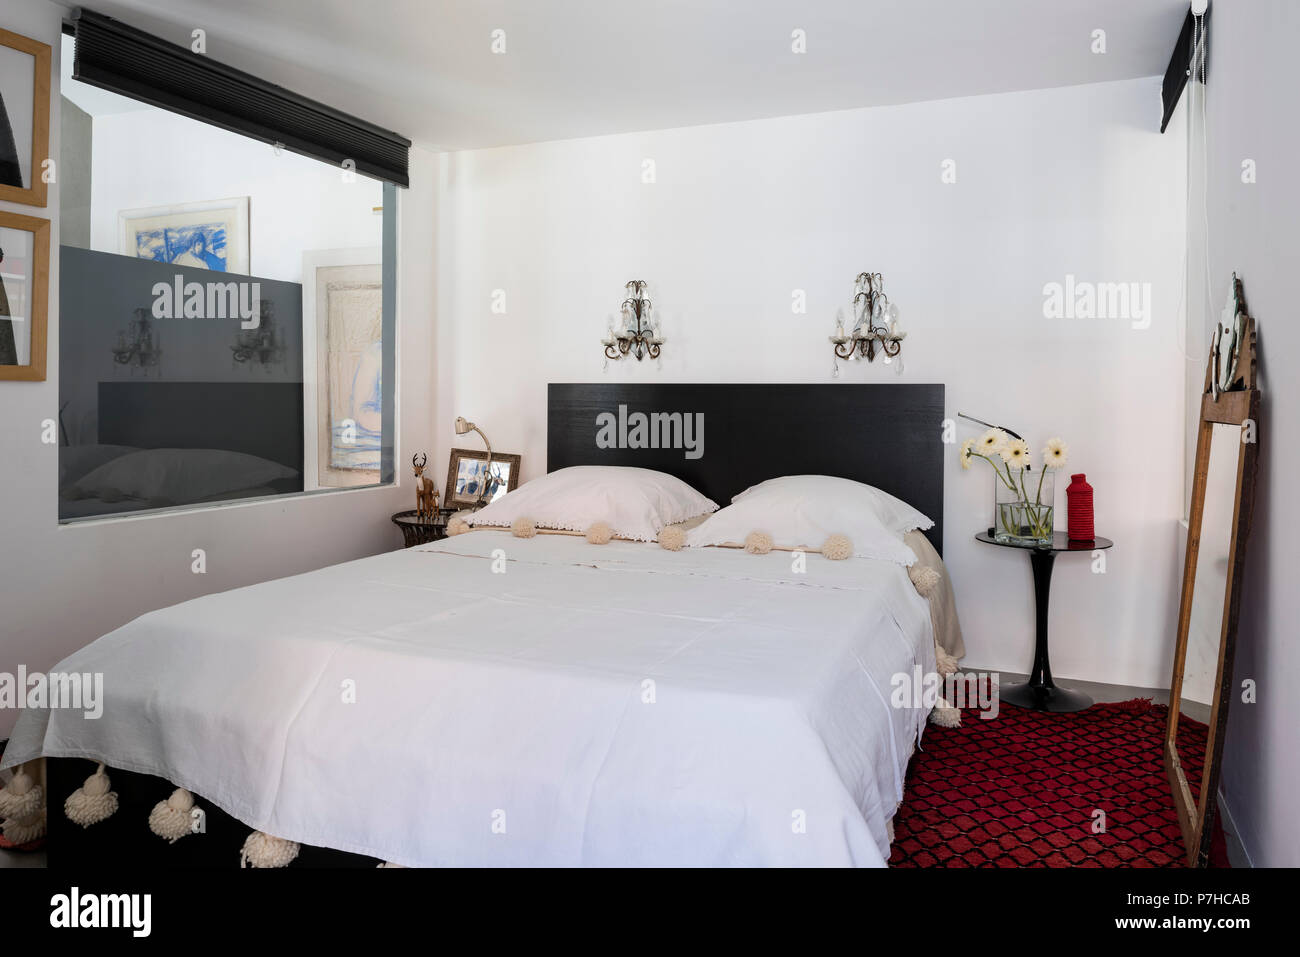 Elegant sleeping area in modern open plan apartment with red morccan reg and antique glass wall sconces Stock Photo